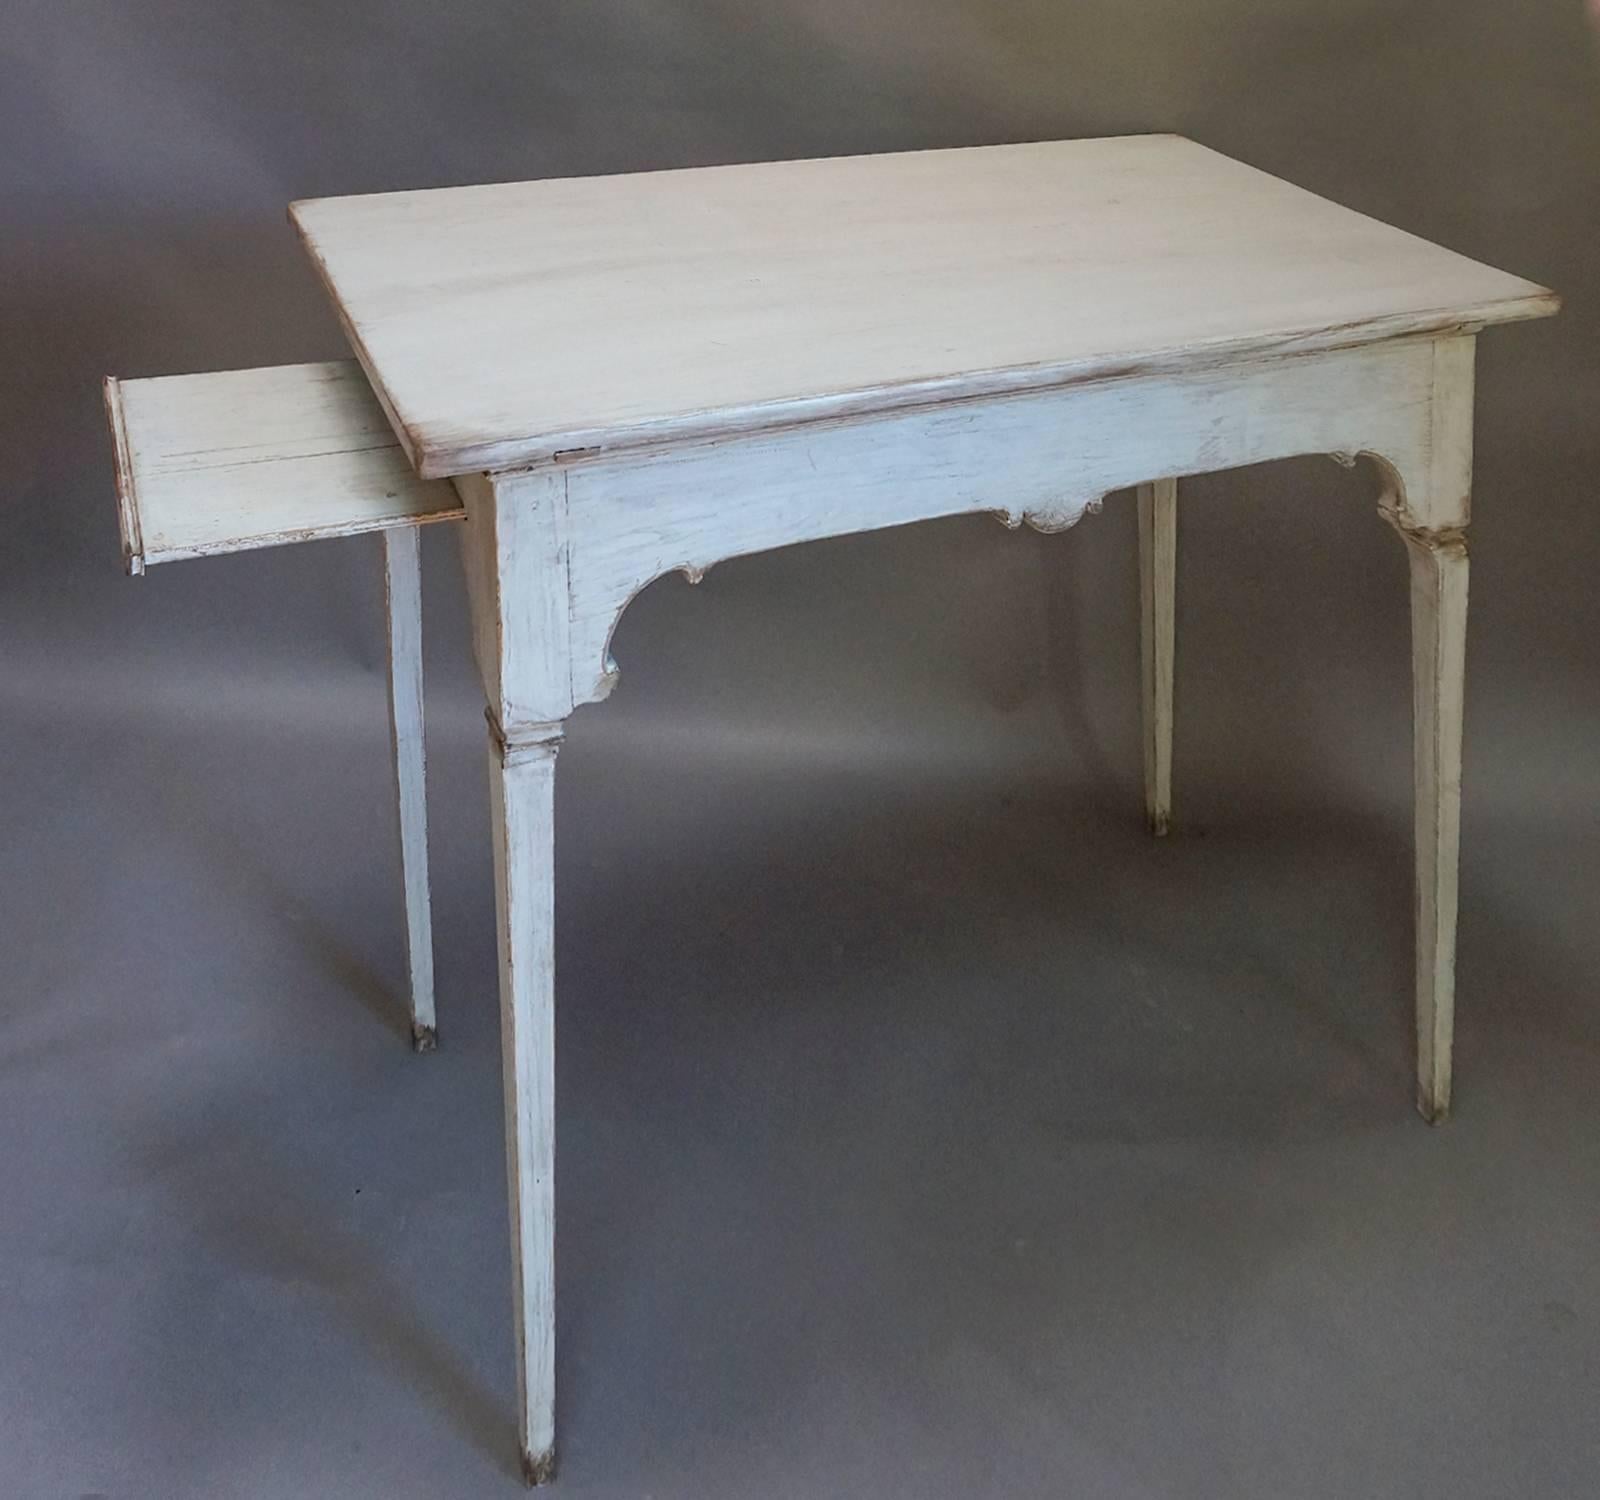 Gustavian Swedish Tea Table with Candle Slides